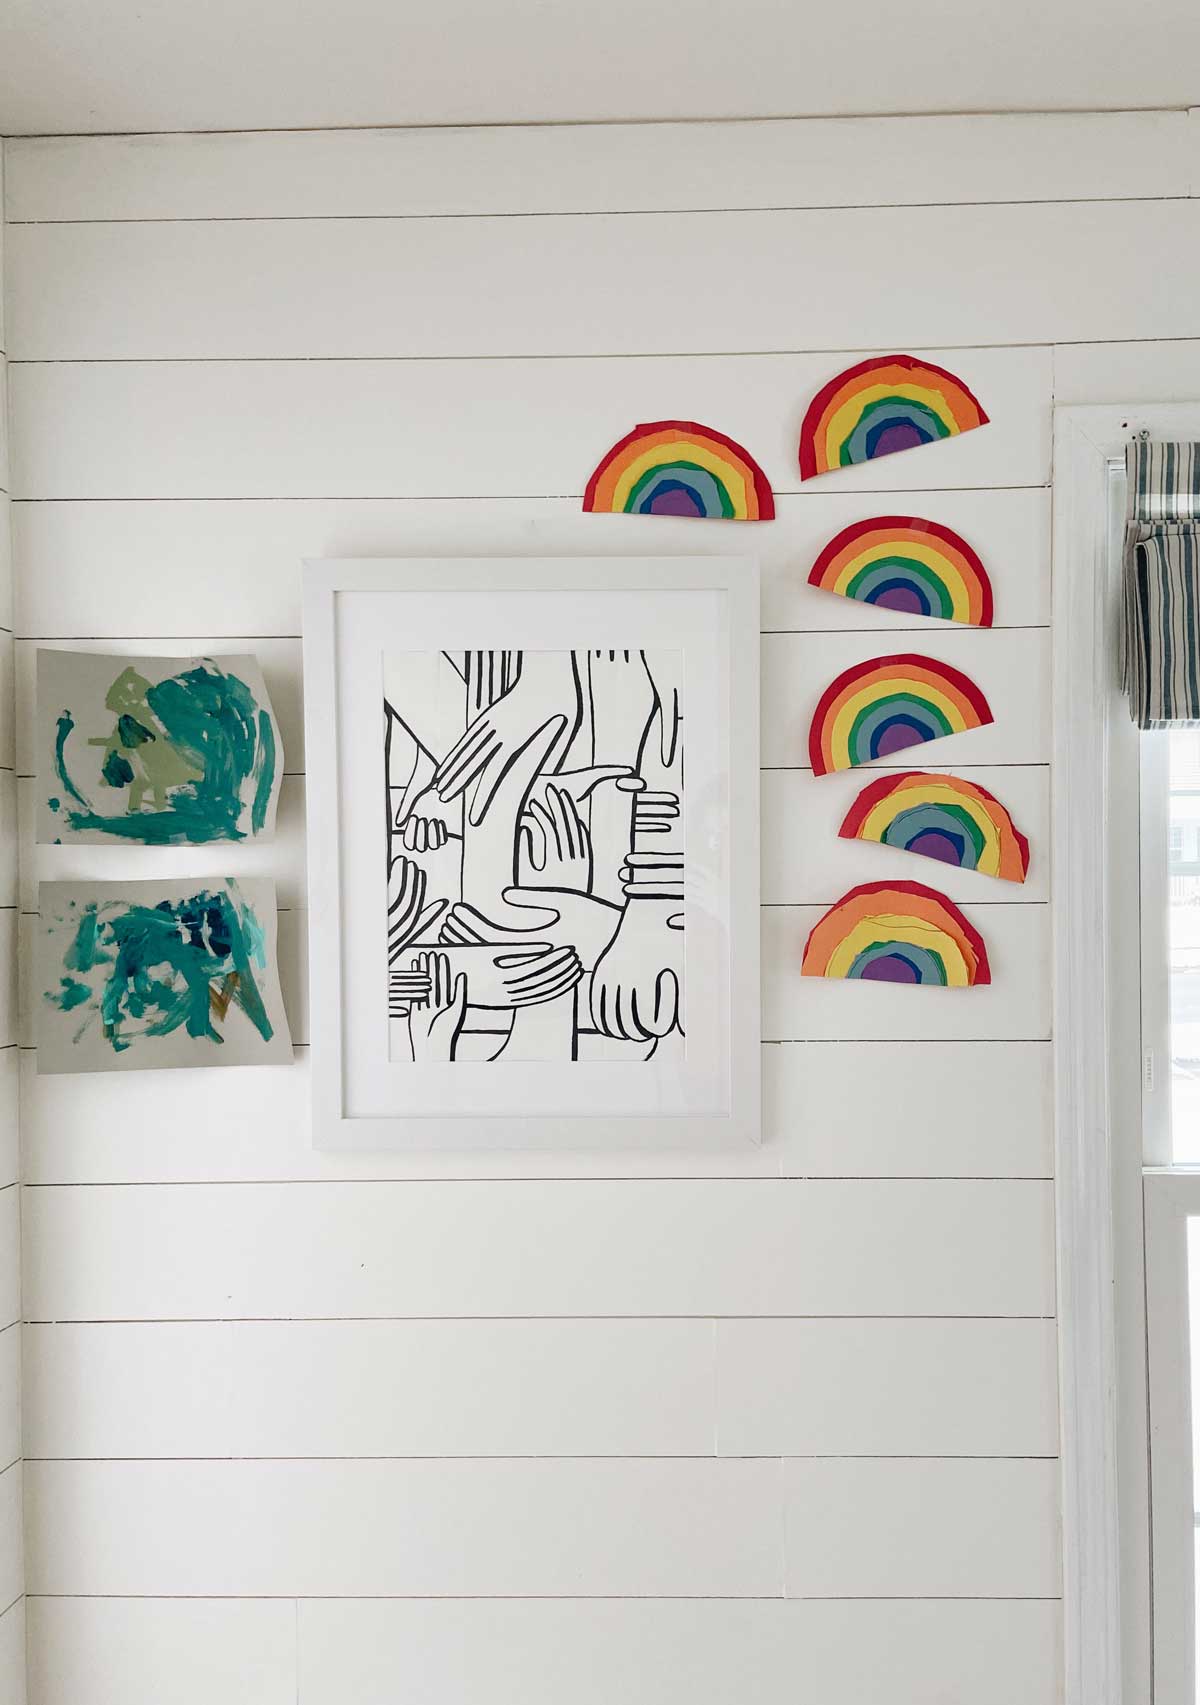 RAINBOW CRAFT FOR YOUNG CHILDREN